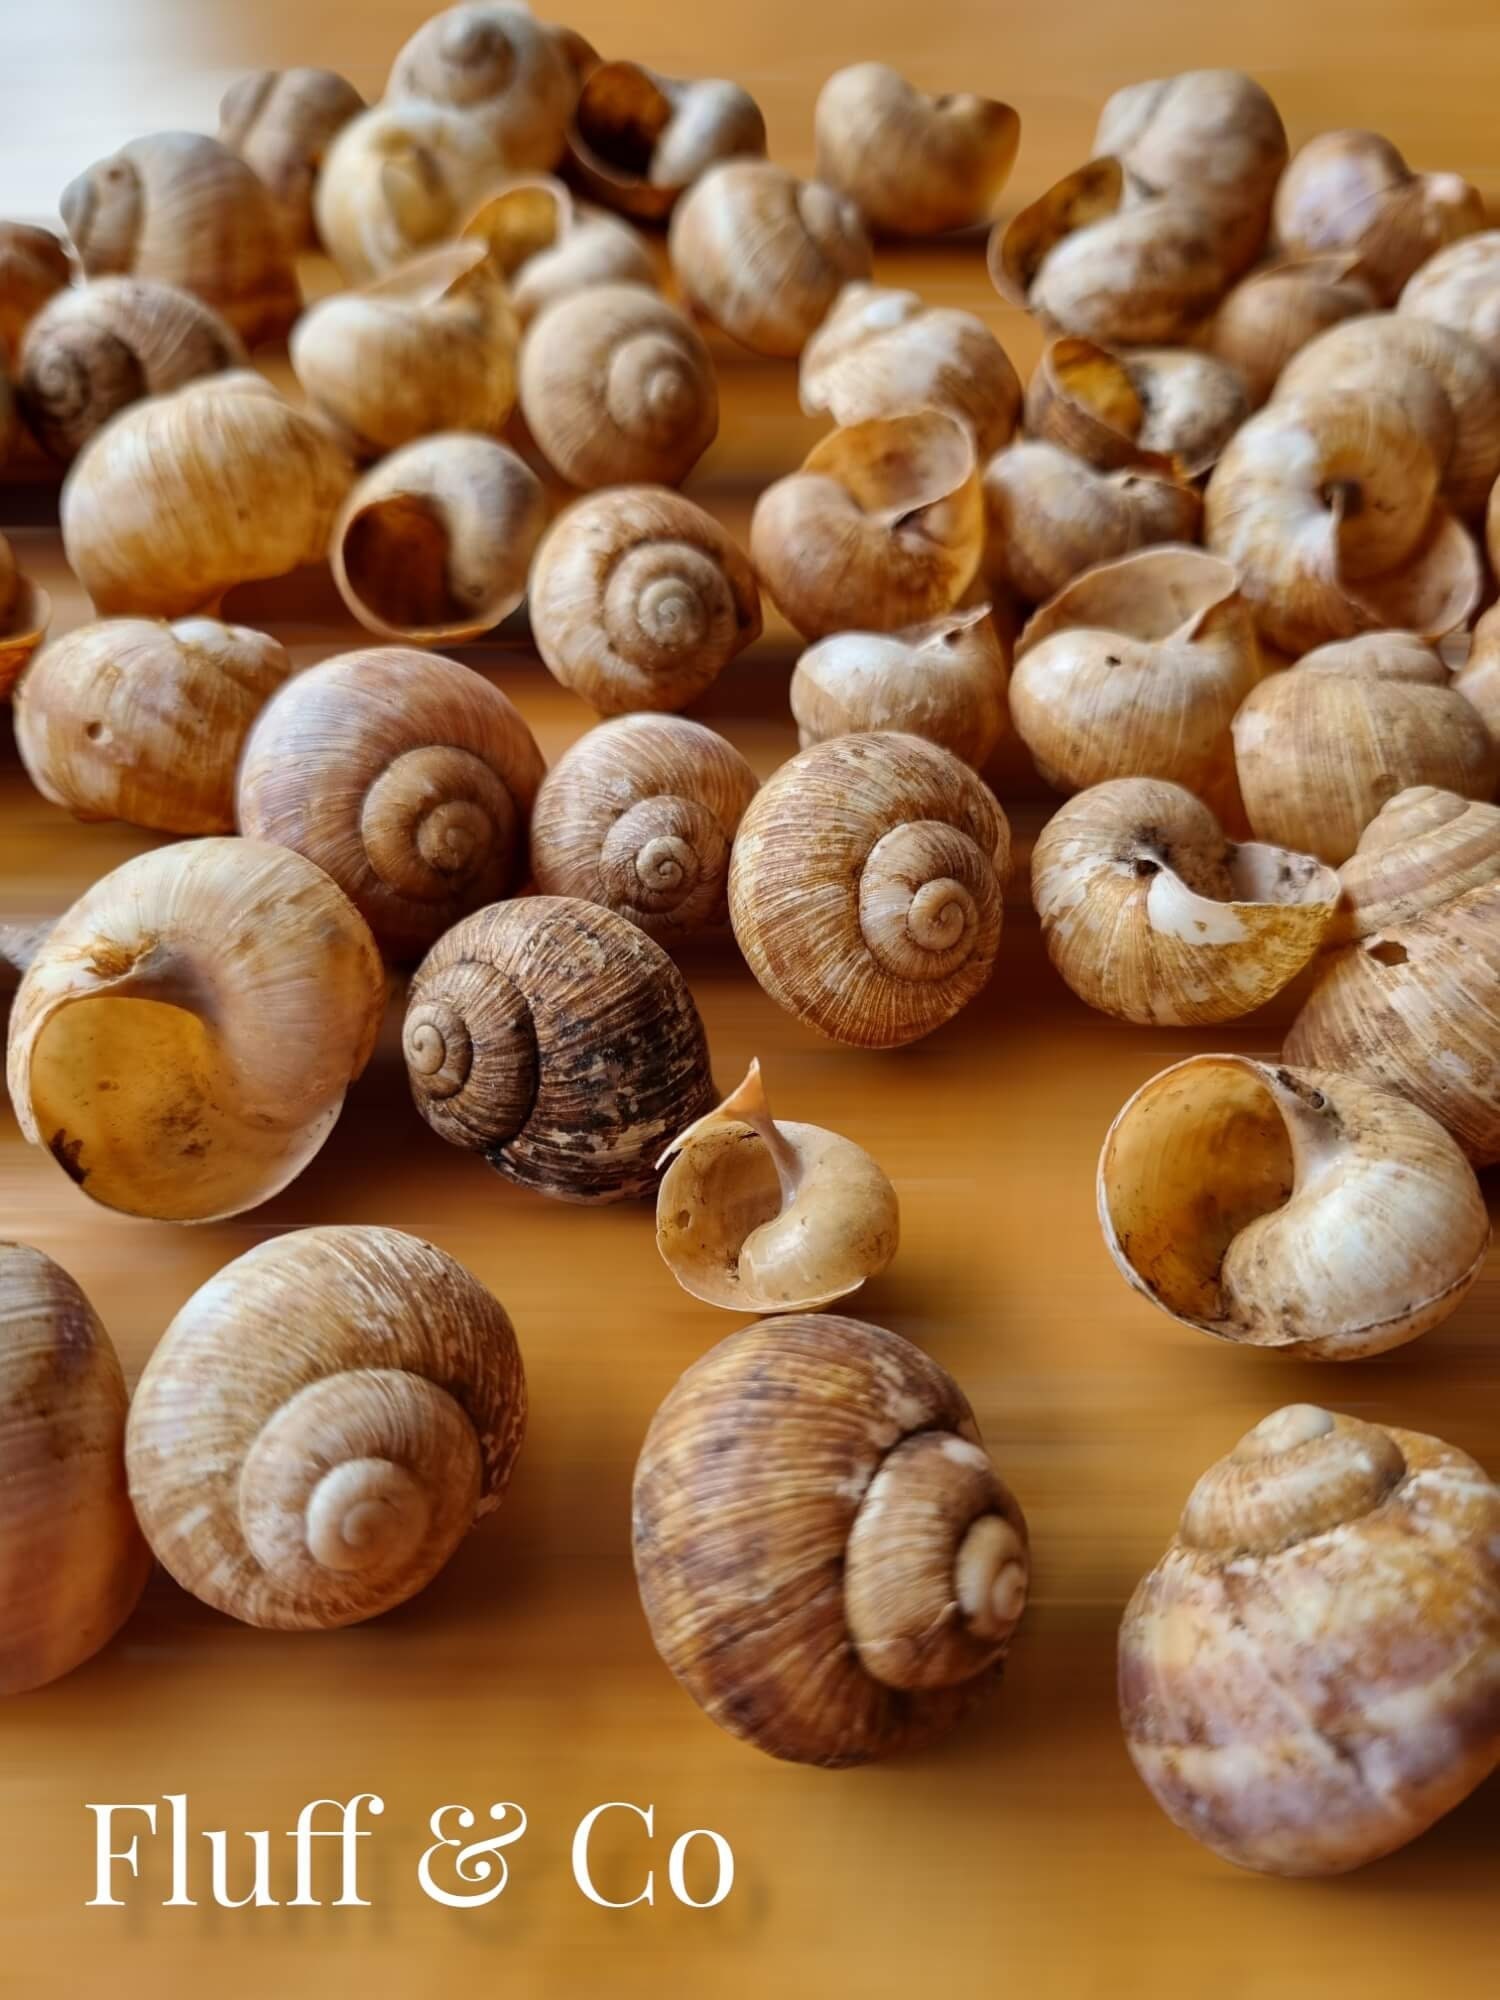 Stunning Snail Shells for Decoration Items for Decorations